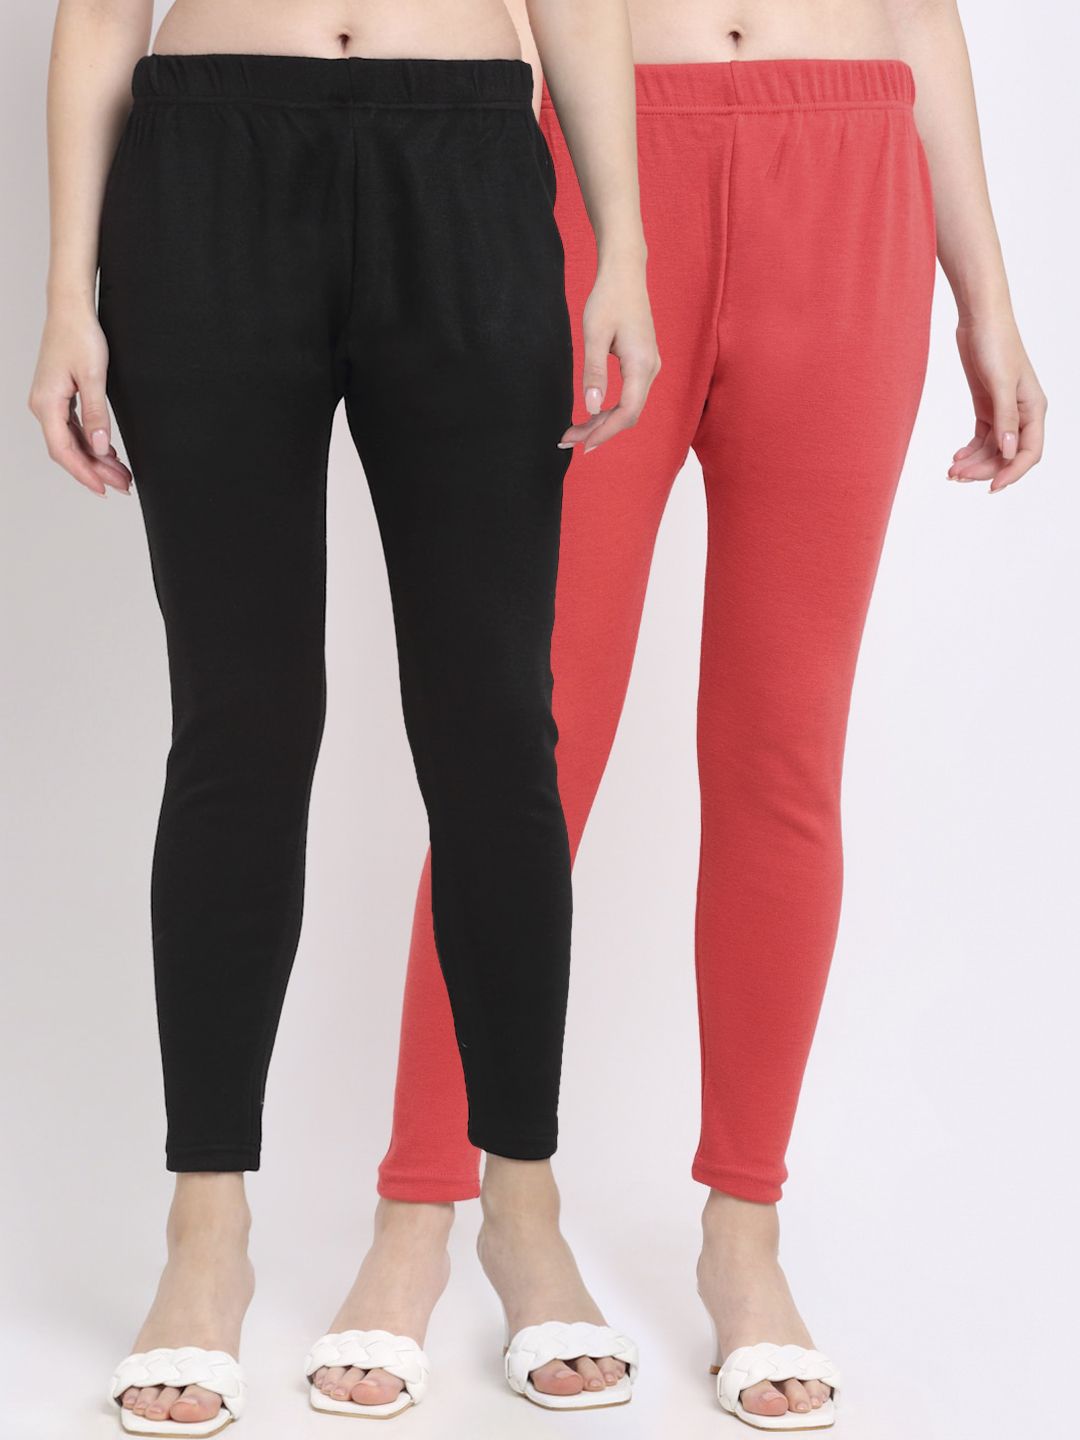 TAG 7 Women Pack Of 2 Peach & Black Solid Ankle-Length Leggings Price in India